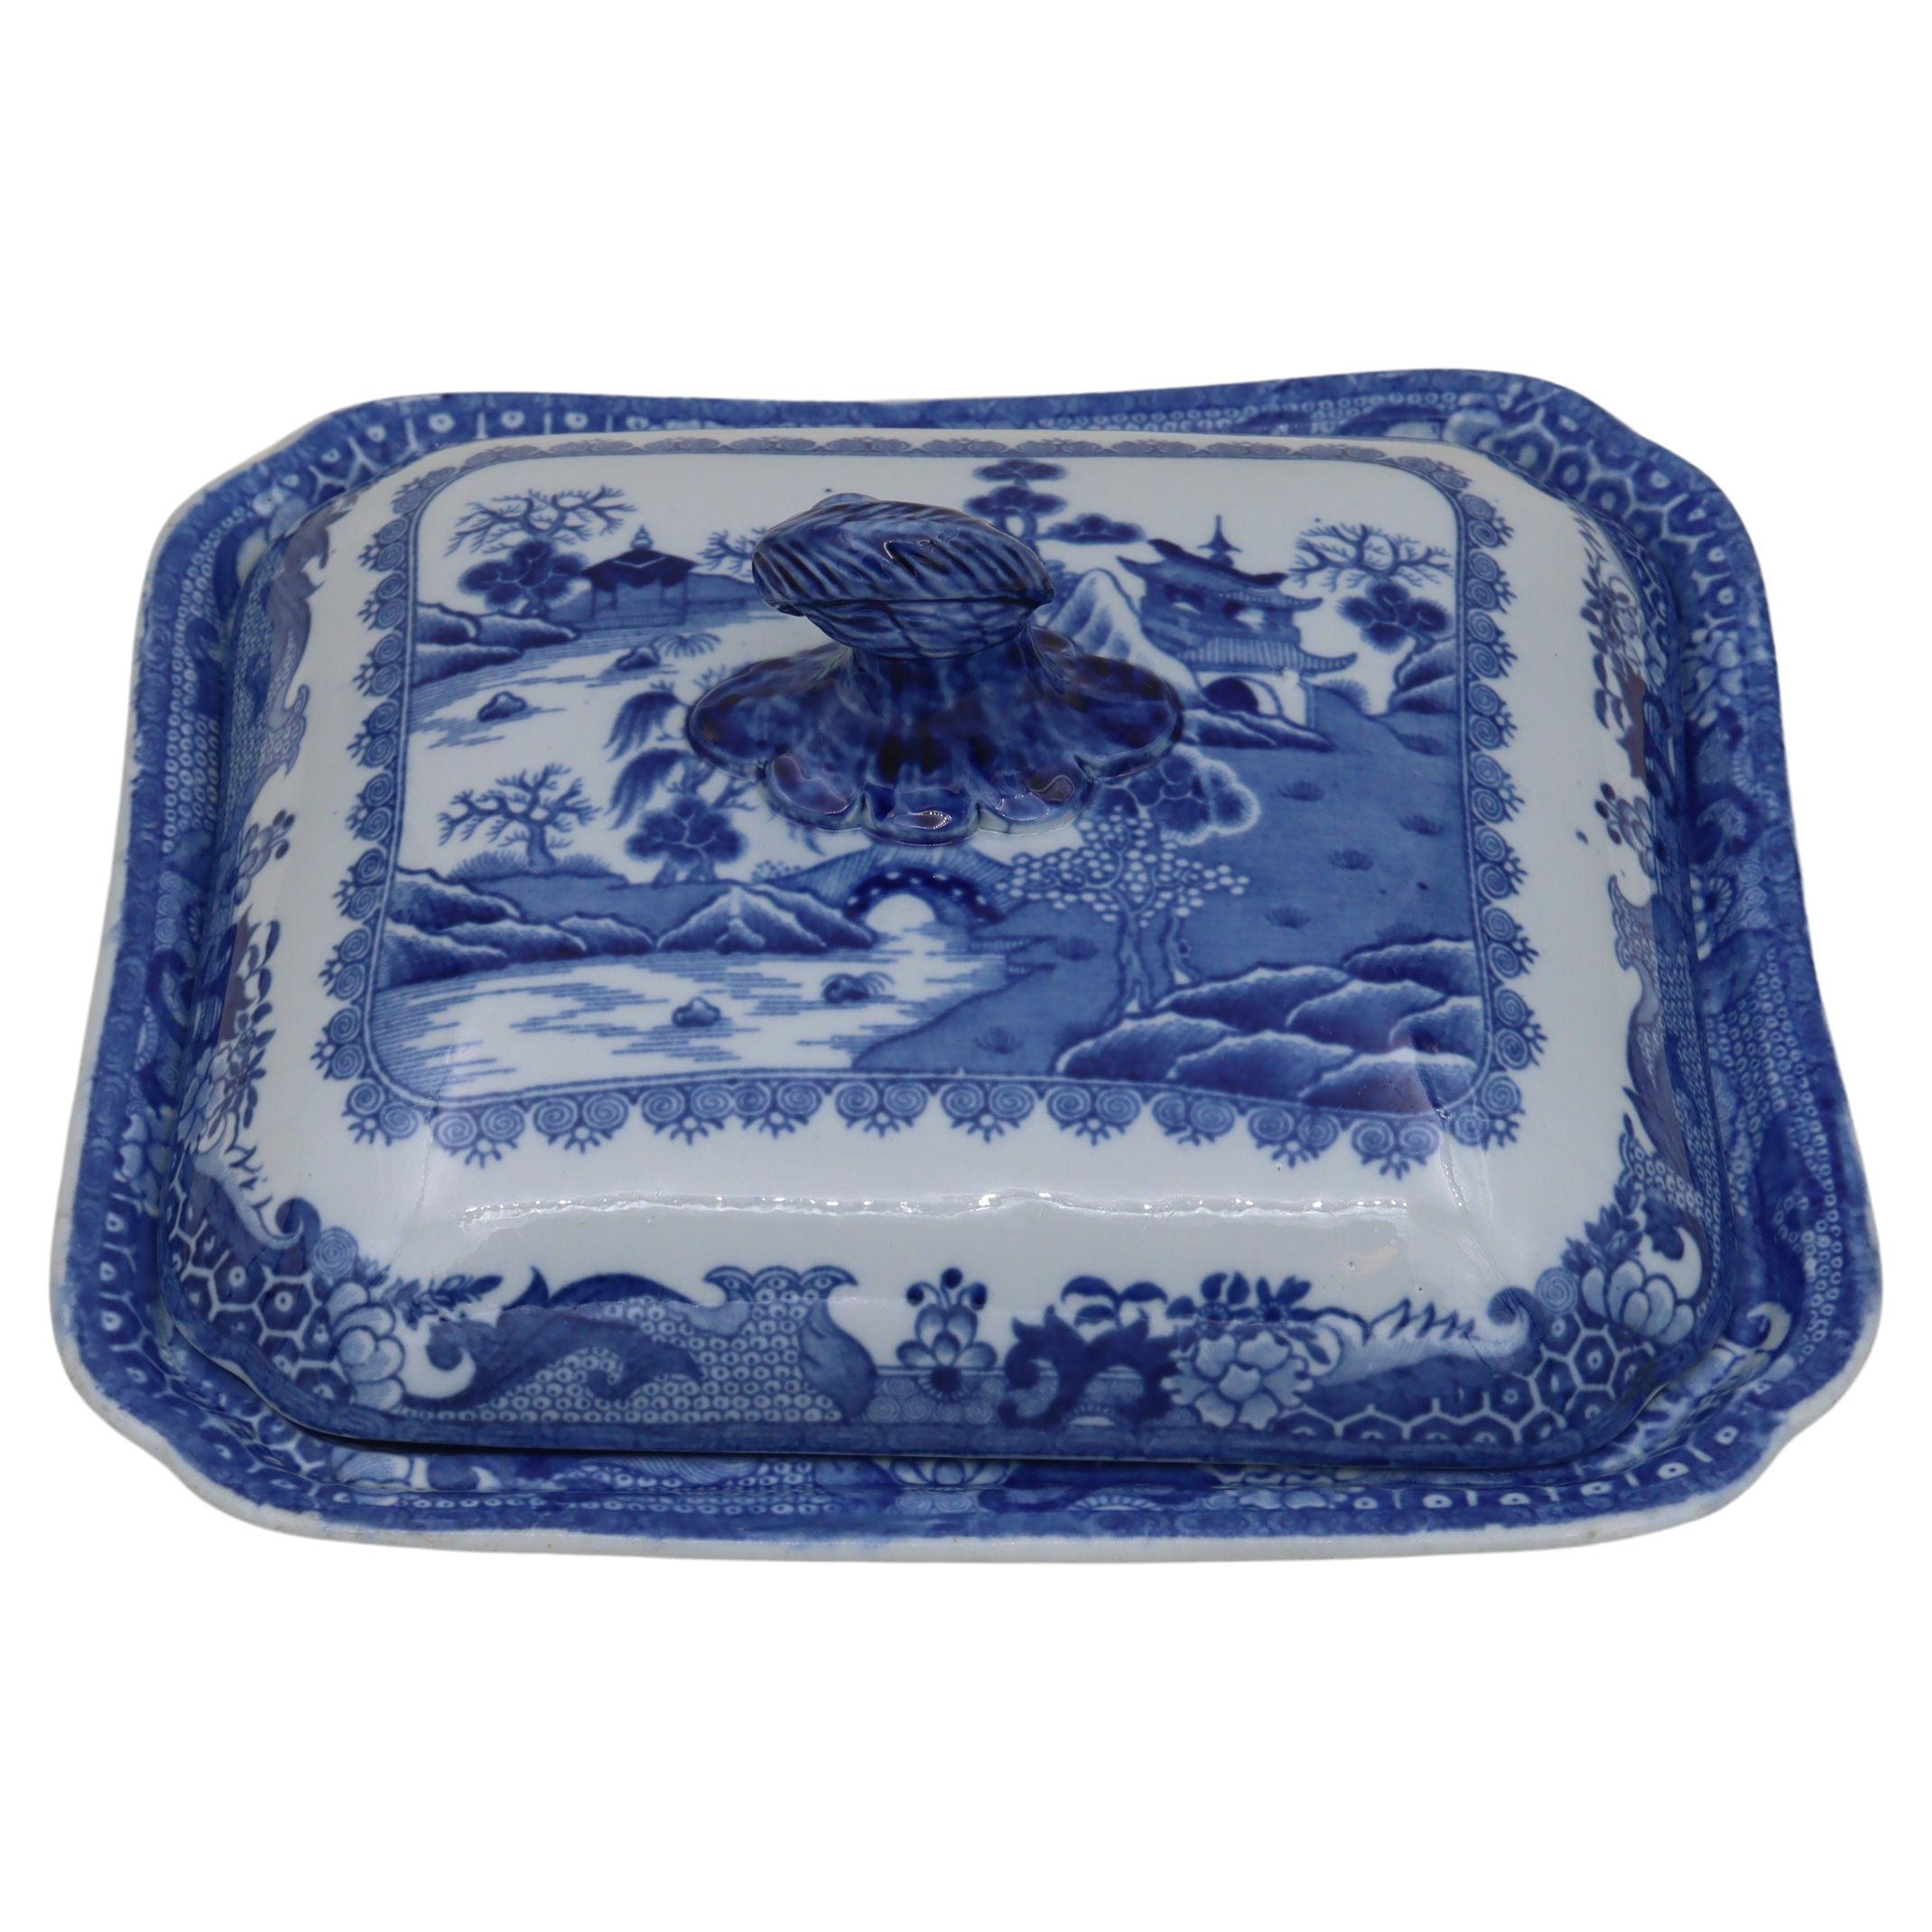 Blue and white willow pattern tureen by Turner